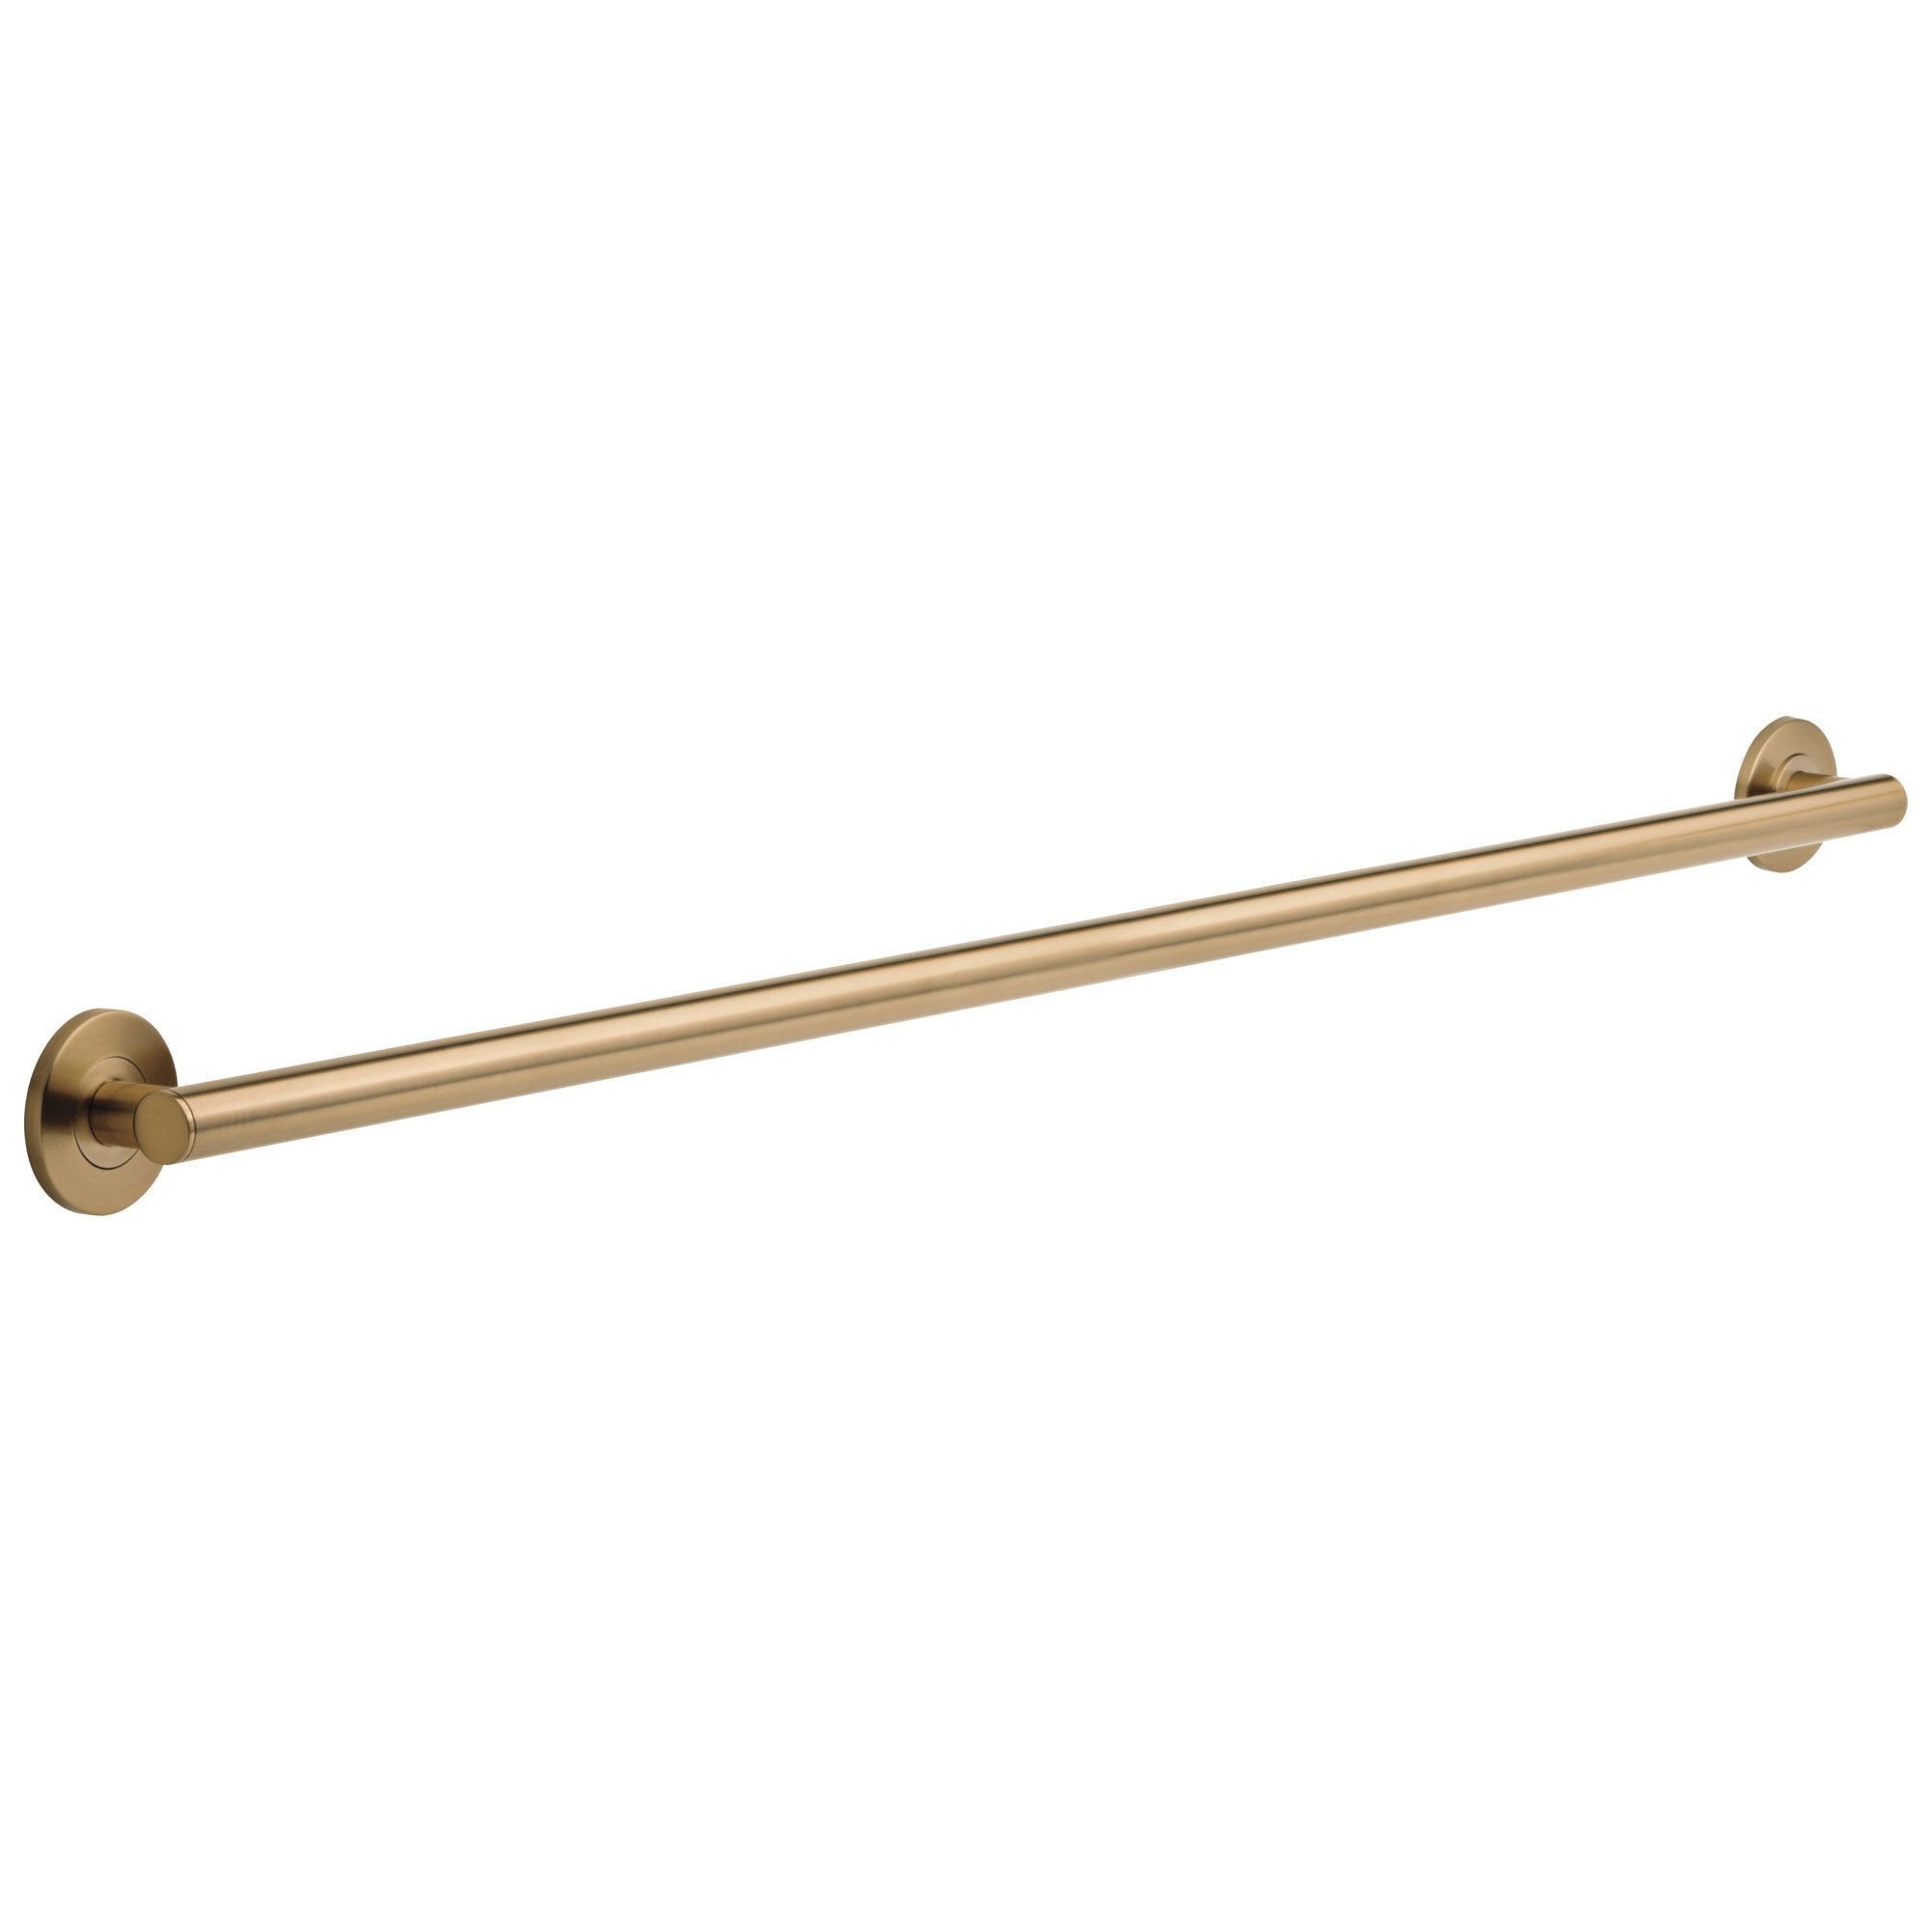 Delta Bath Safety Collection Champagne Bronze Contemporary Wall Mount ADA Approved 42" Long Decorative Bathroom Grab Bar / Towel Bar D41842CZ